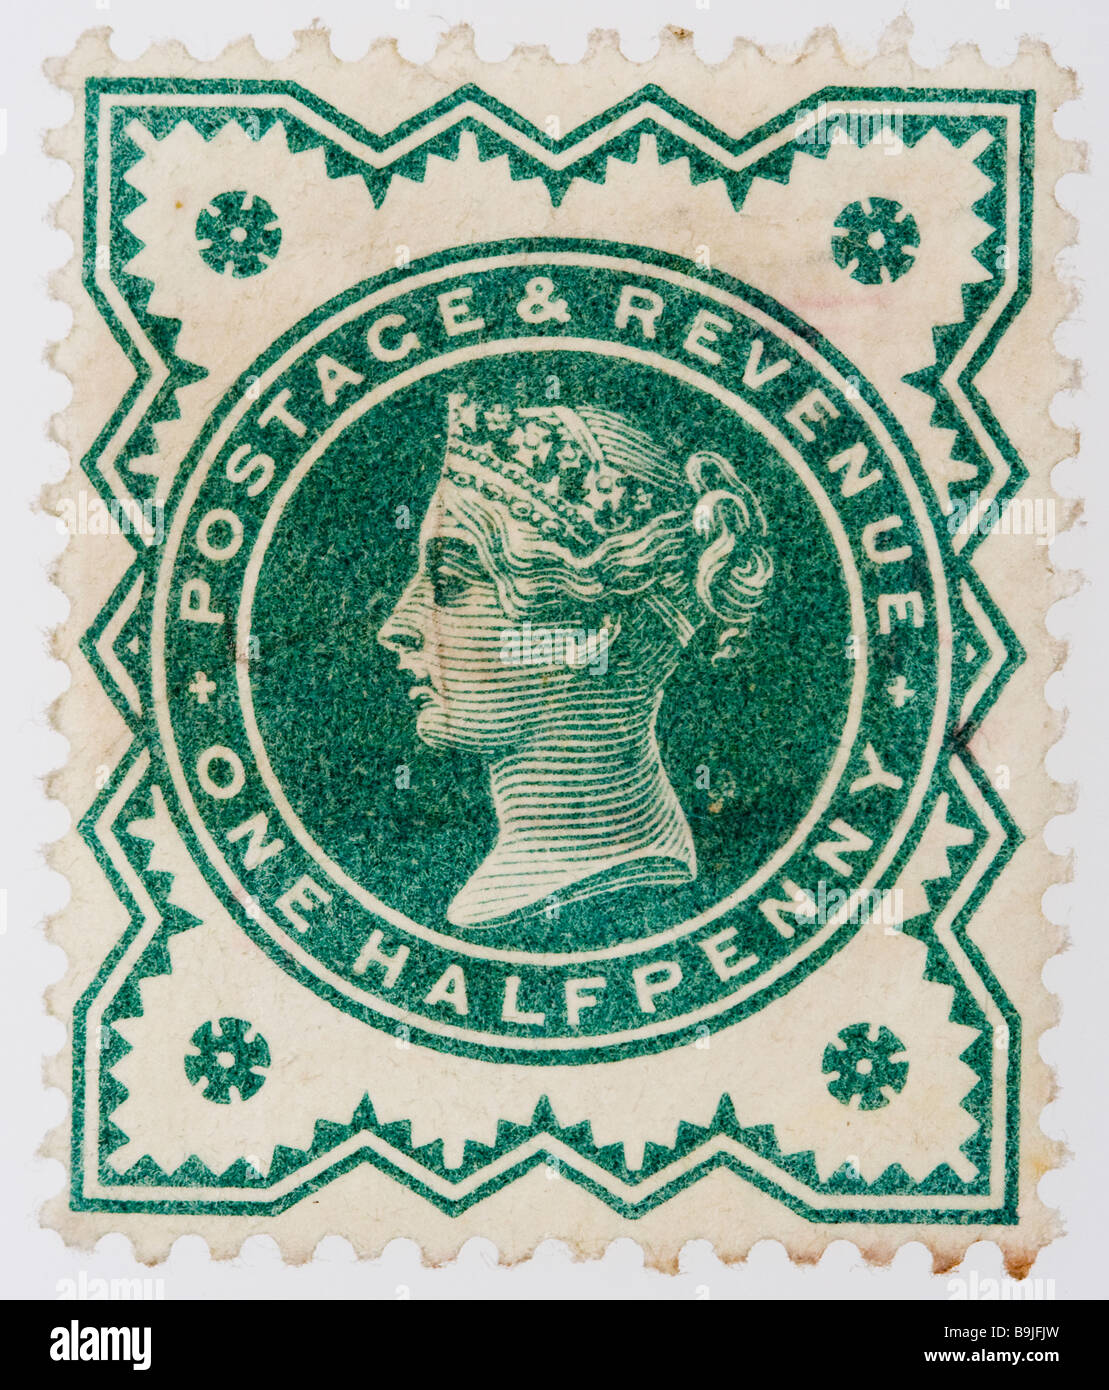 Close up of ½d, one half penny green Victorian British Postal stamp on white background issued between 1887-1900, part of the 'Jubilee Issue'. Unused. Stock Photo